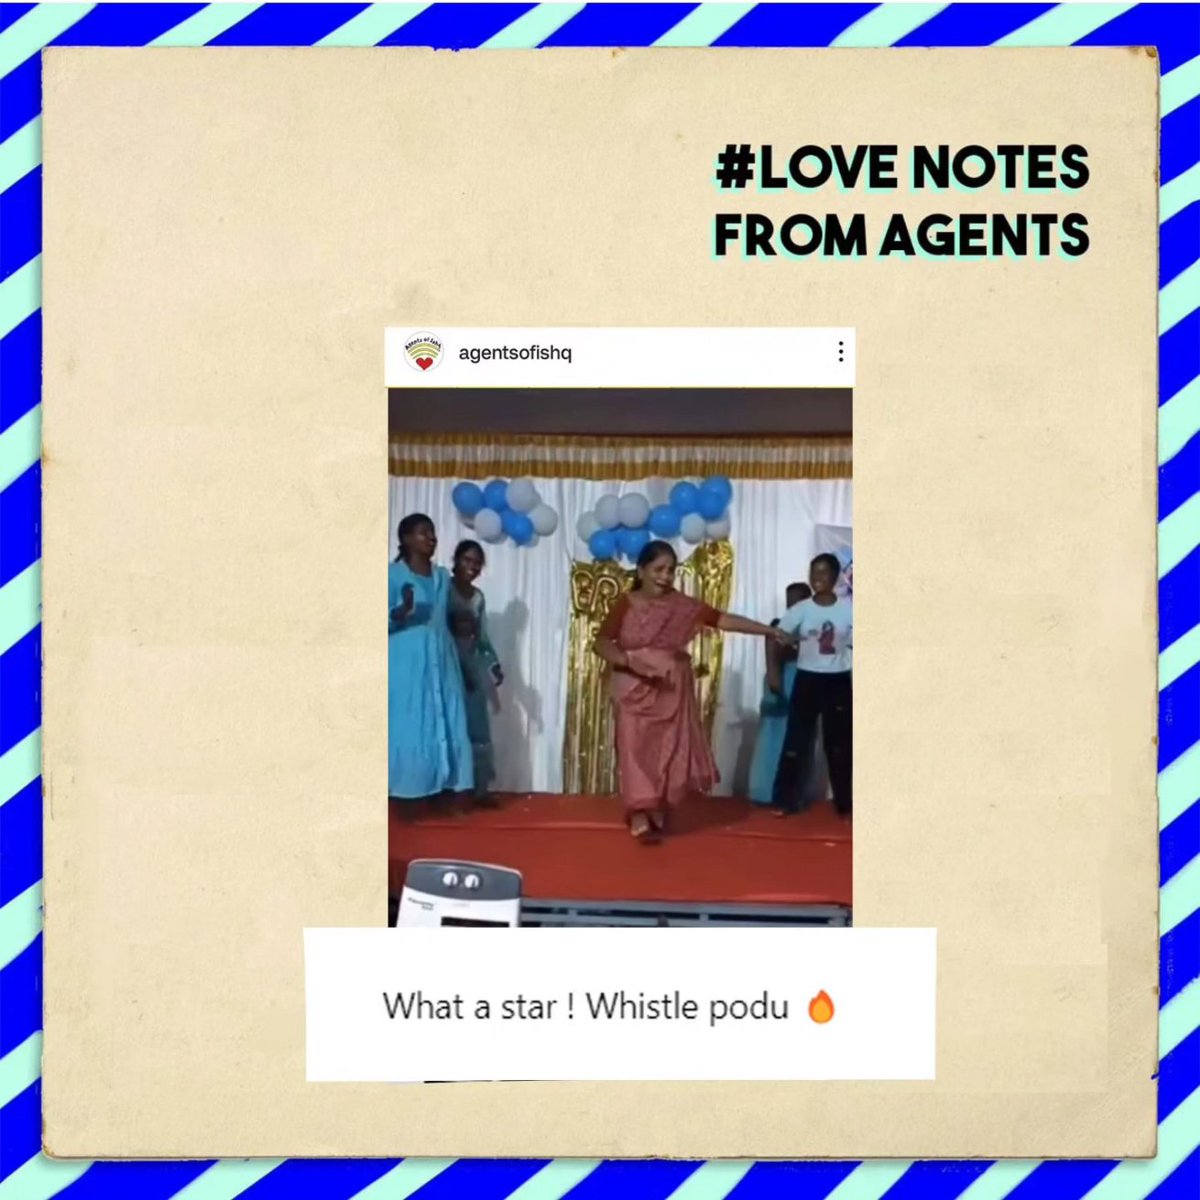 We love when our content strikes a chord with you, and becomes food for thought. Thanks, Agents! #LoveNotes #ComplimentsforAOI #Gratitude #AgentsKiAwaaz